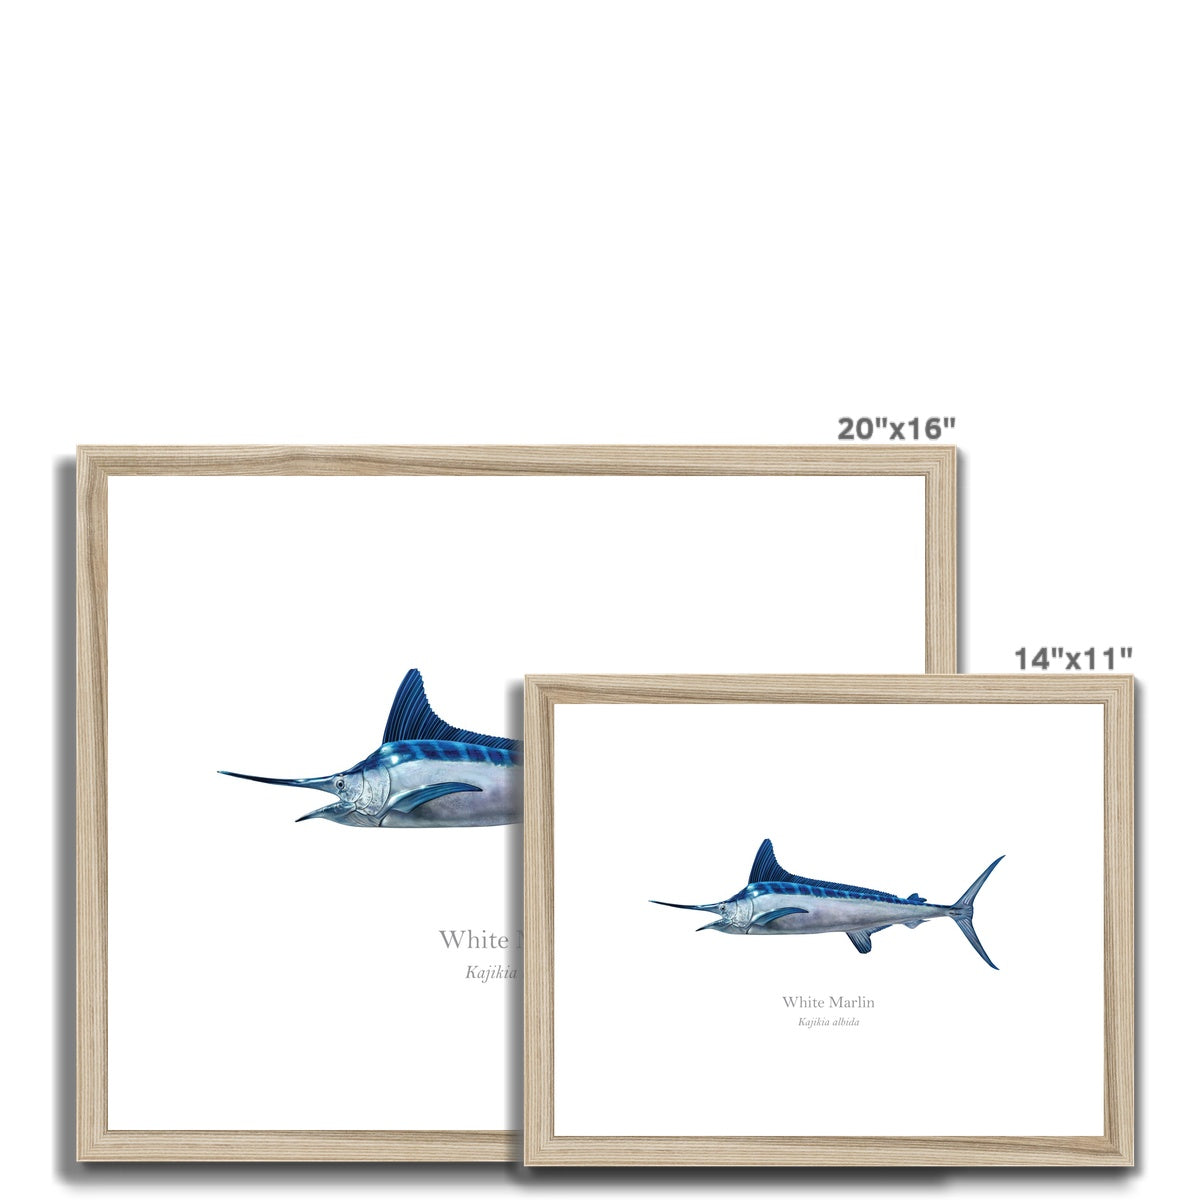 White Marlin - Framed & Mounted Print - With Scientific Name